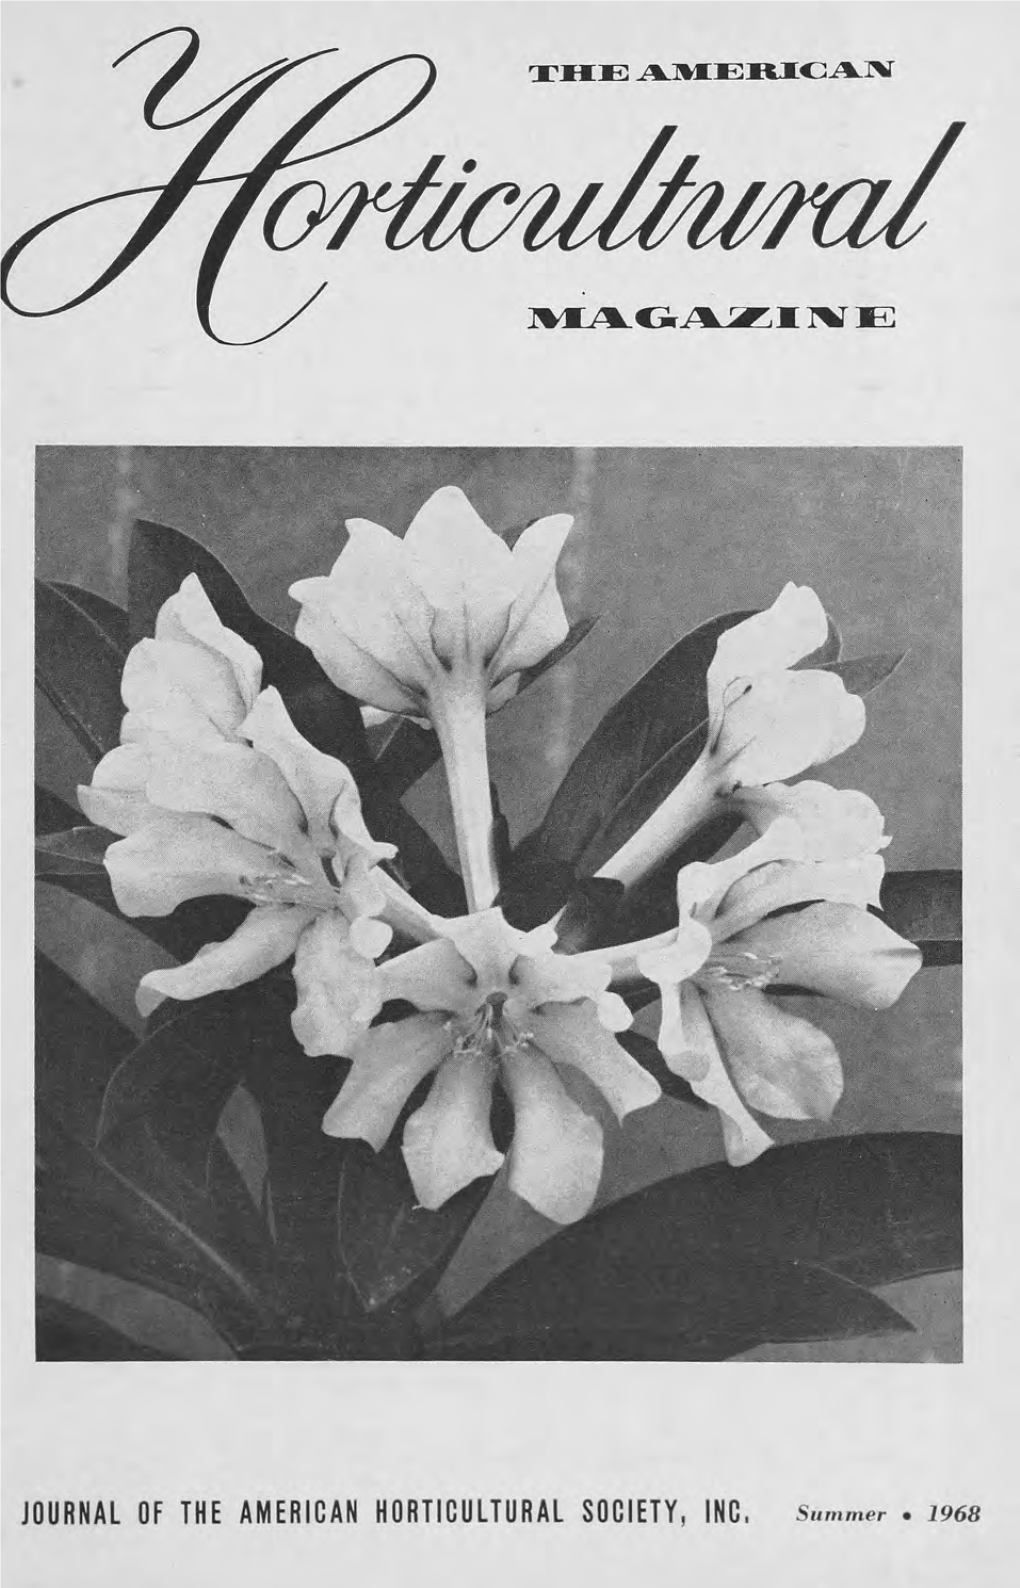 Journal of the American Horticultural Society, Inc